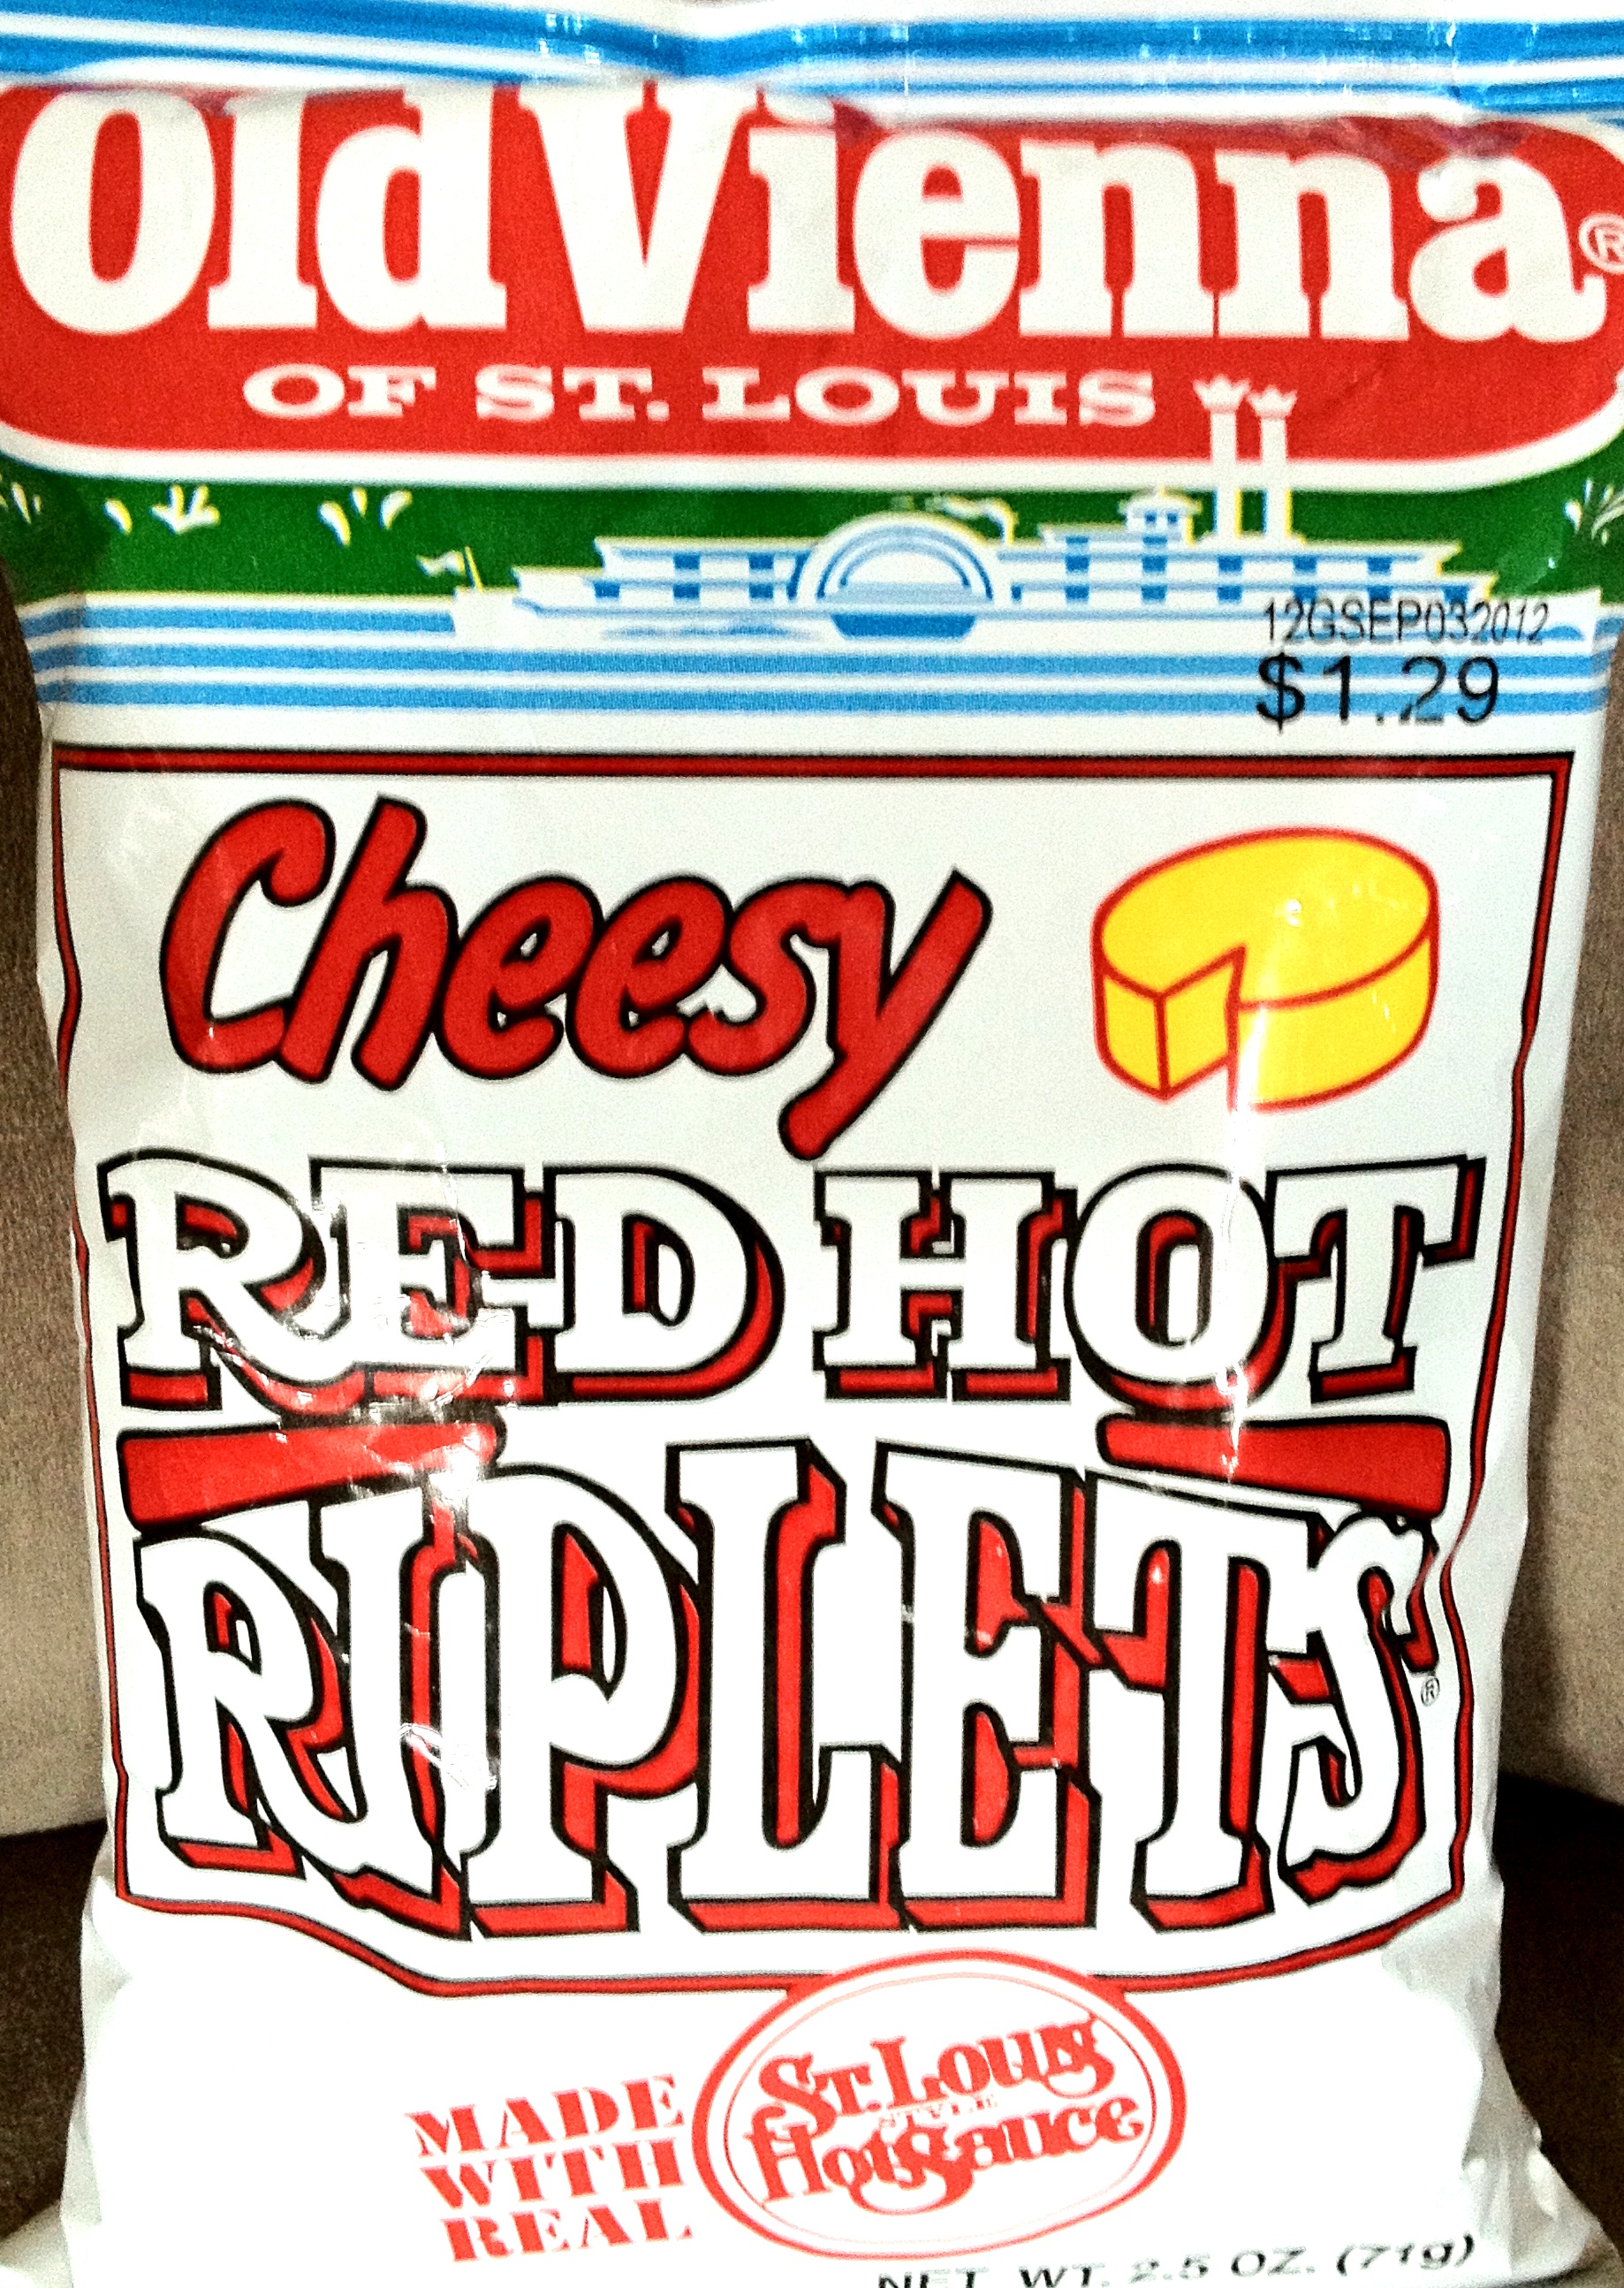 https://chipreview.files.wordpress.com/2012/09/old-vienna-of-st-louis-cheesy-red-hot-riplets.jpg